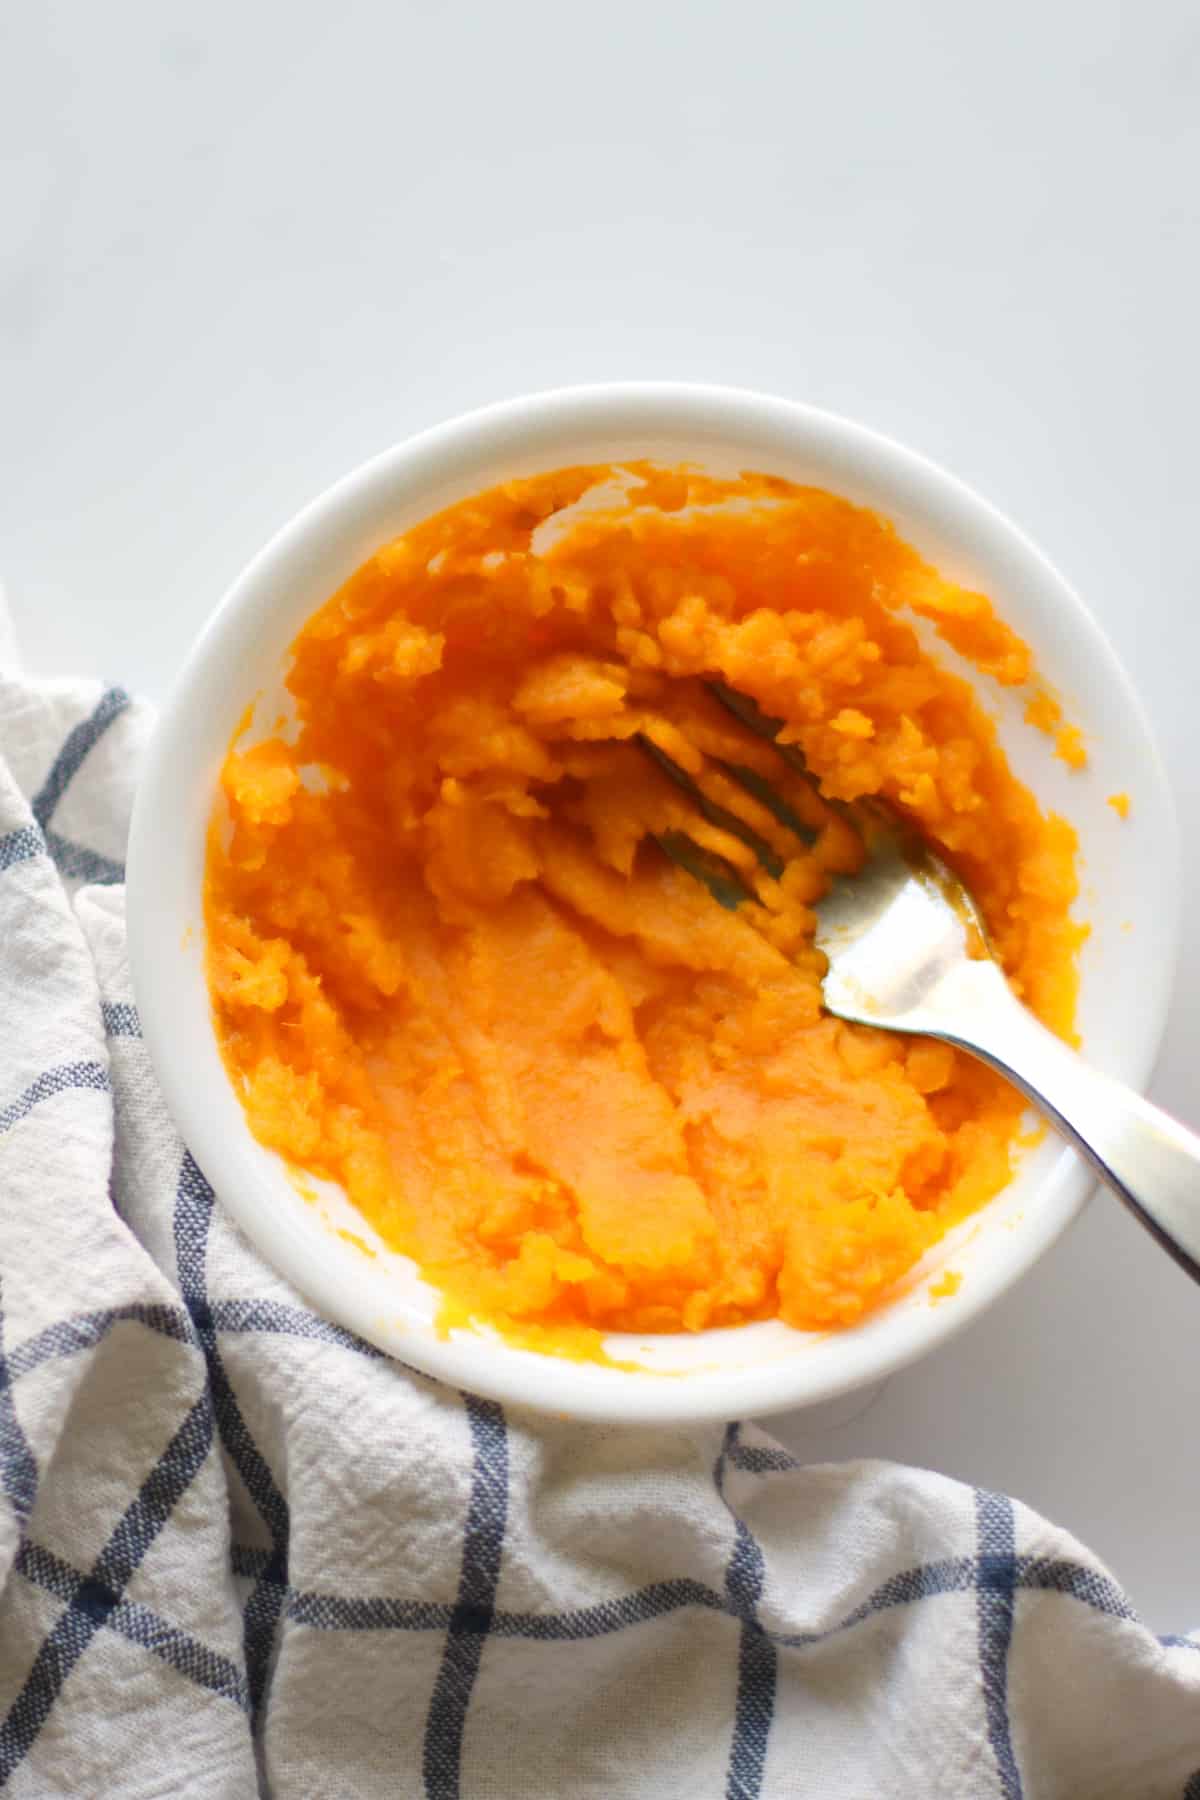 Mashed pumpkin in a white bowl with a fork.